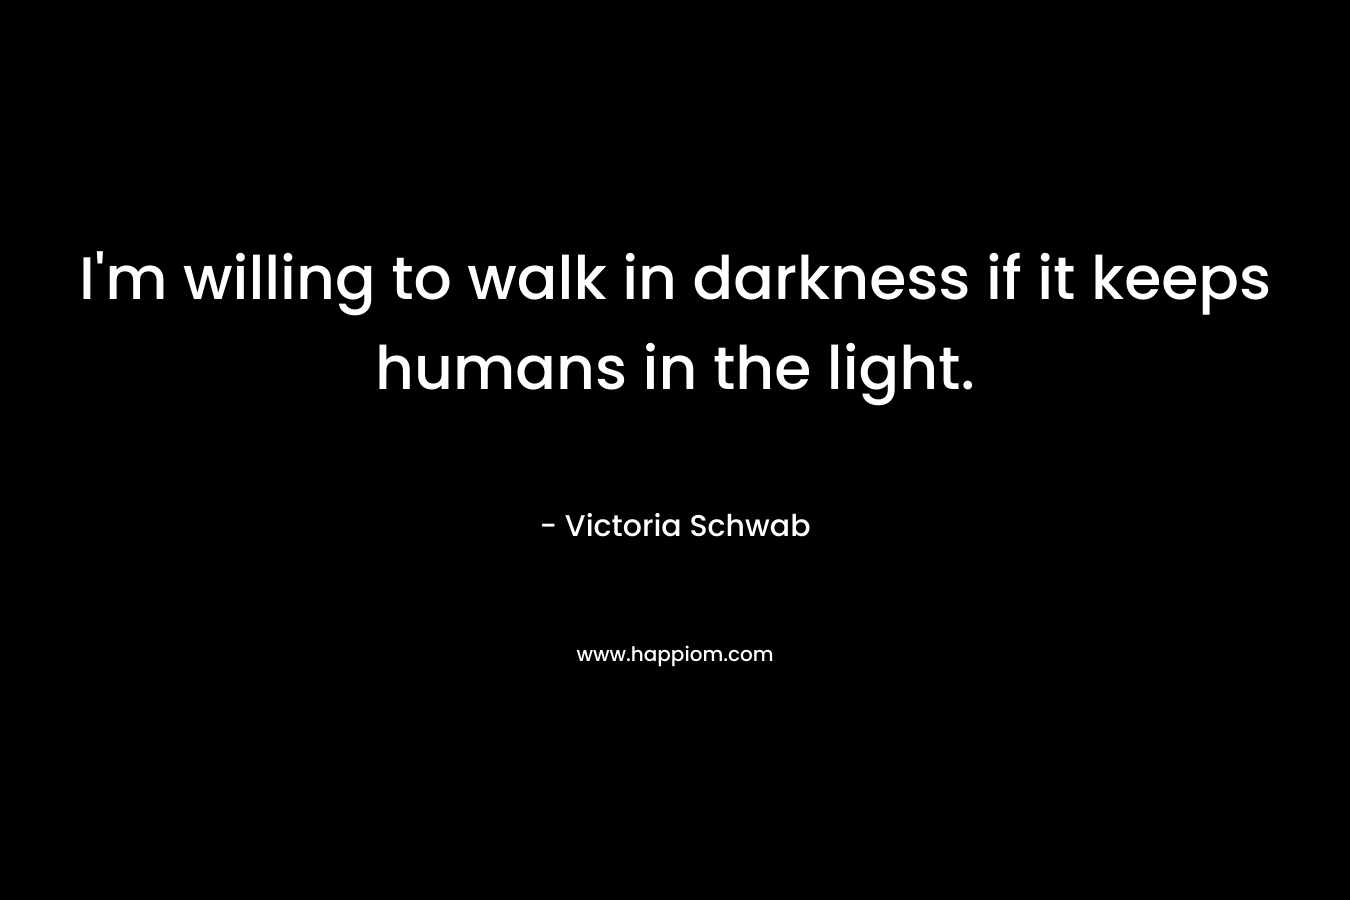 I'm willing to walk in darkness if it keeps humans in the light.